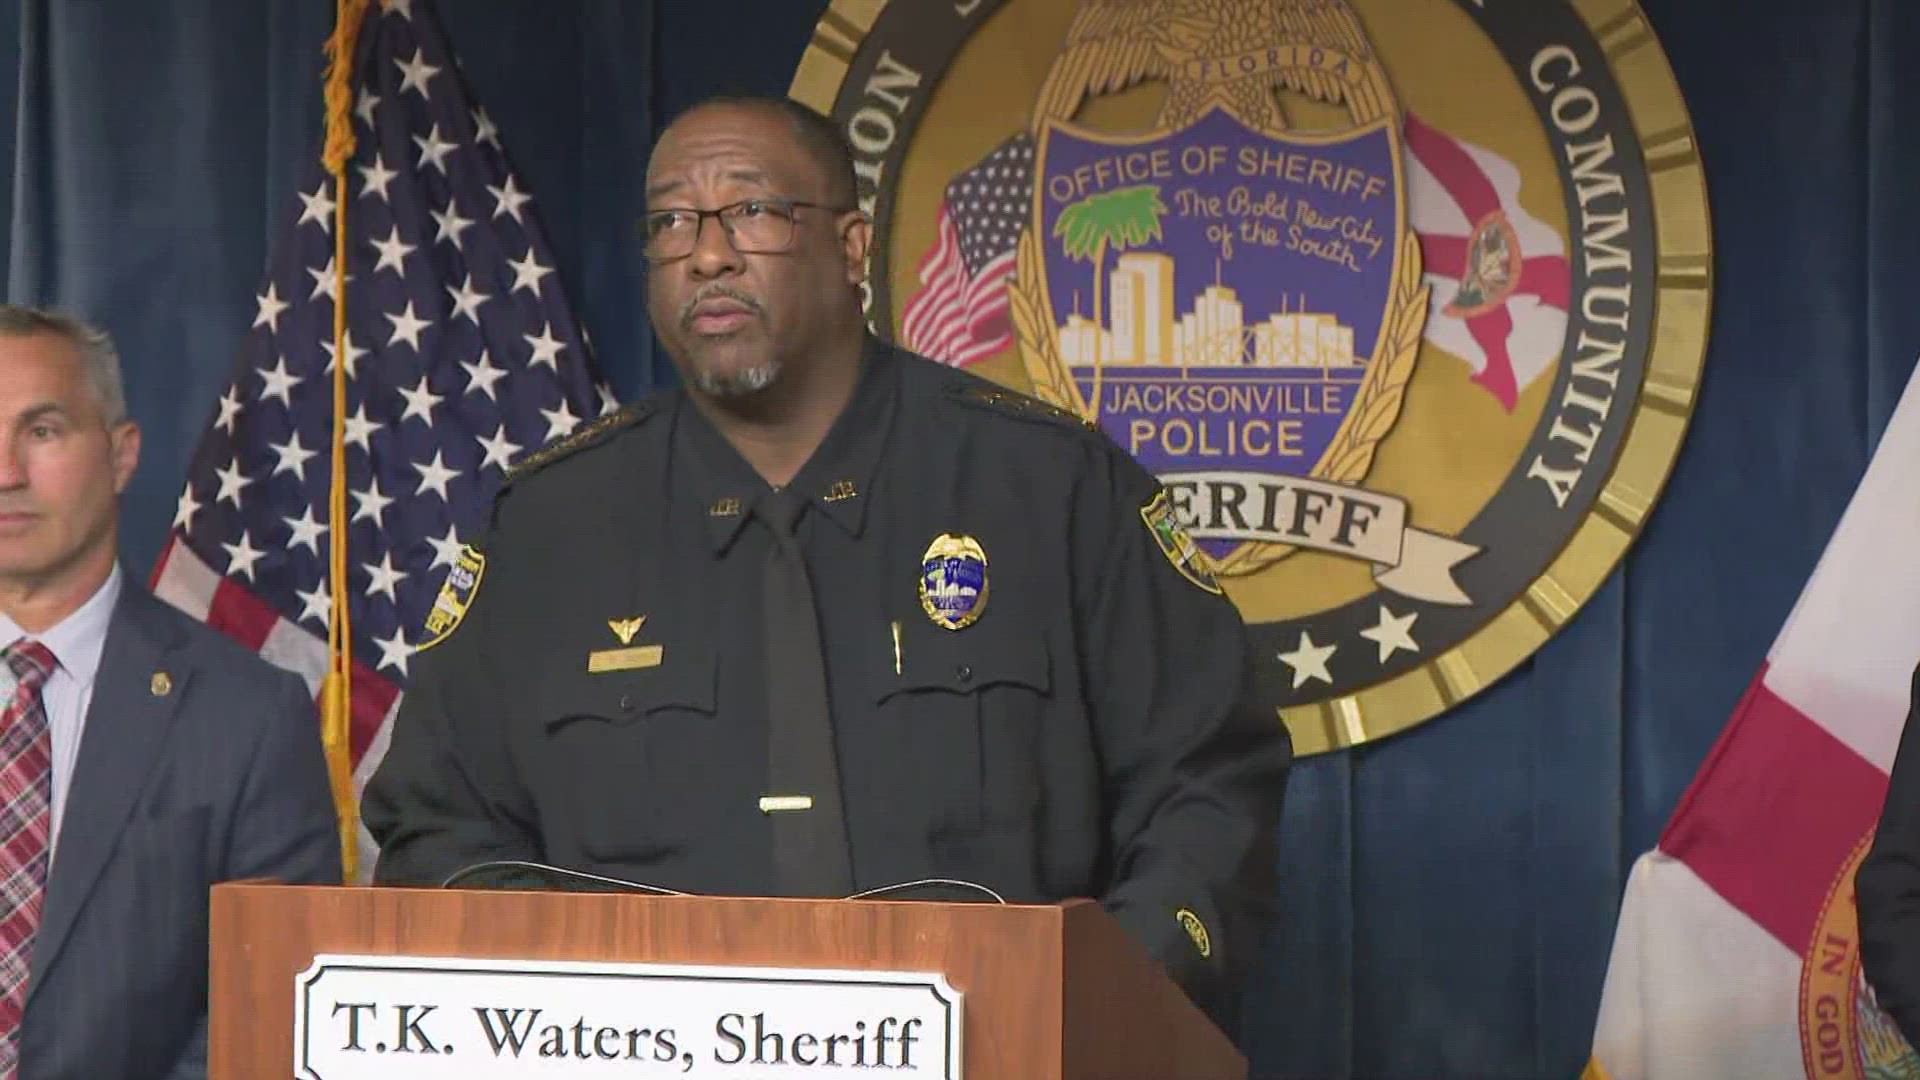 "We are just going to continue to hope for his full recovery," Sheriff T.K. Waters said.